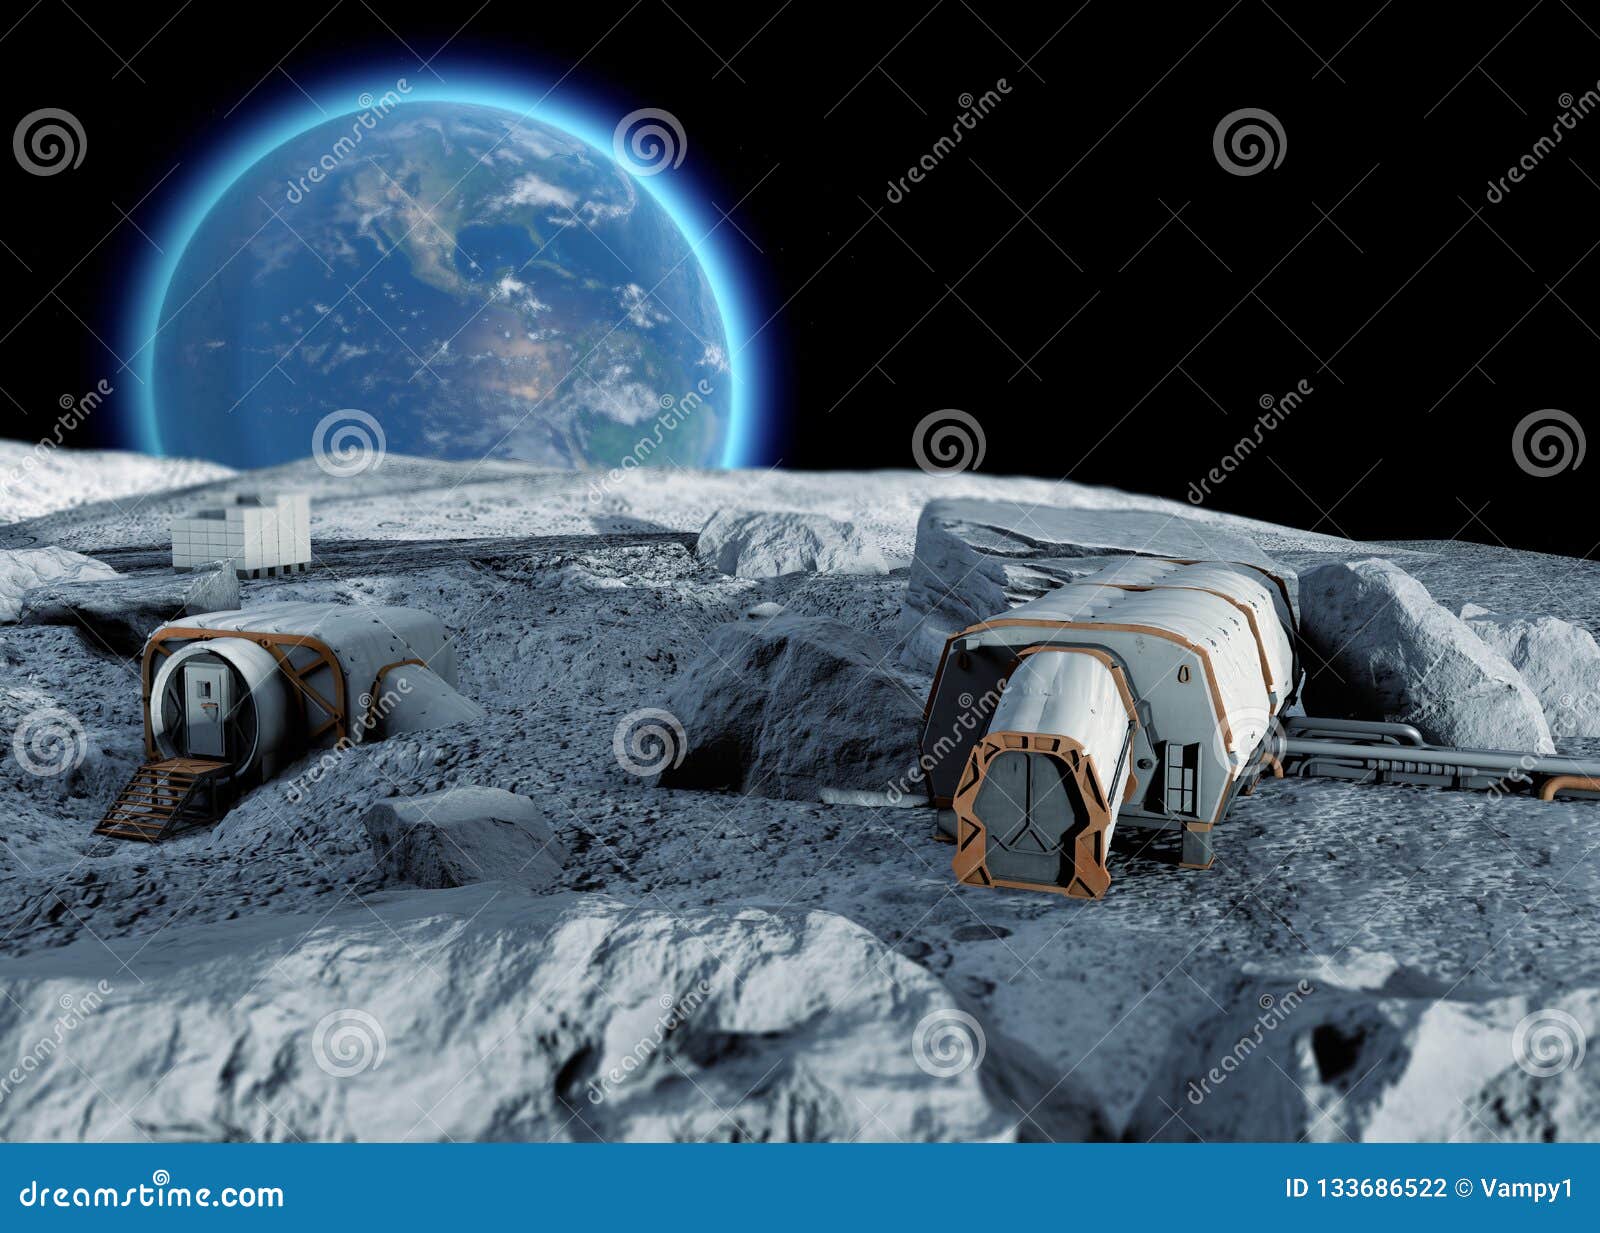 lunar base, spatial outpost. first settlement on the moon. space missions. living modules for the conquest of space.